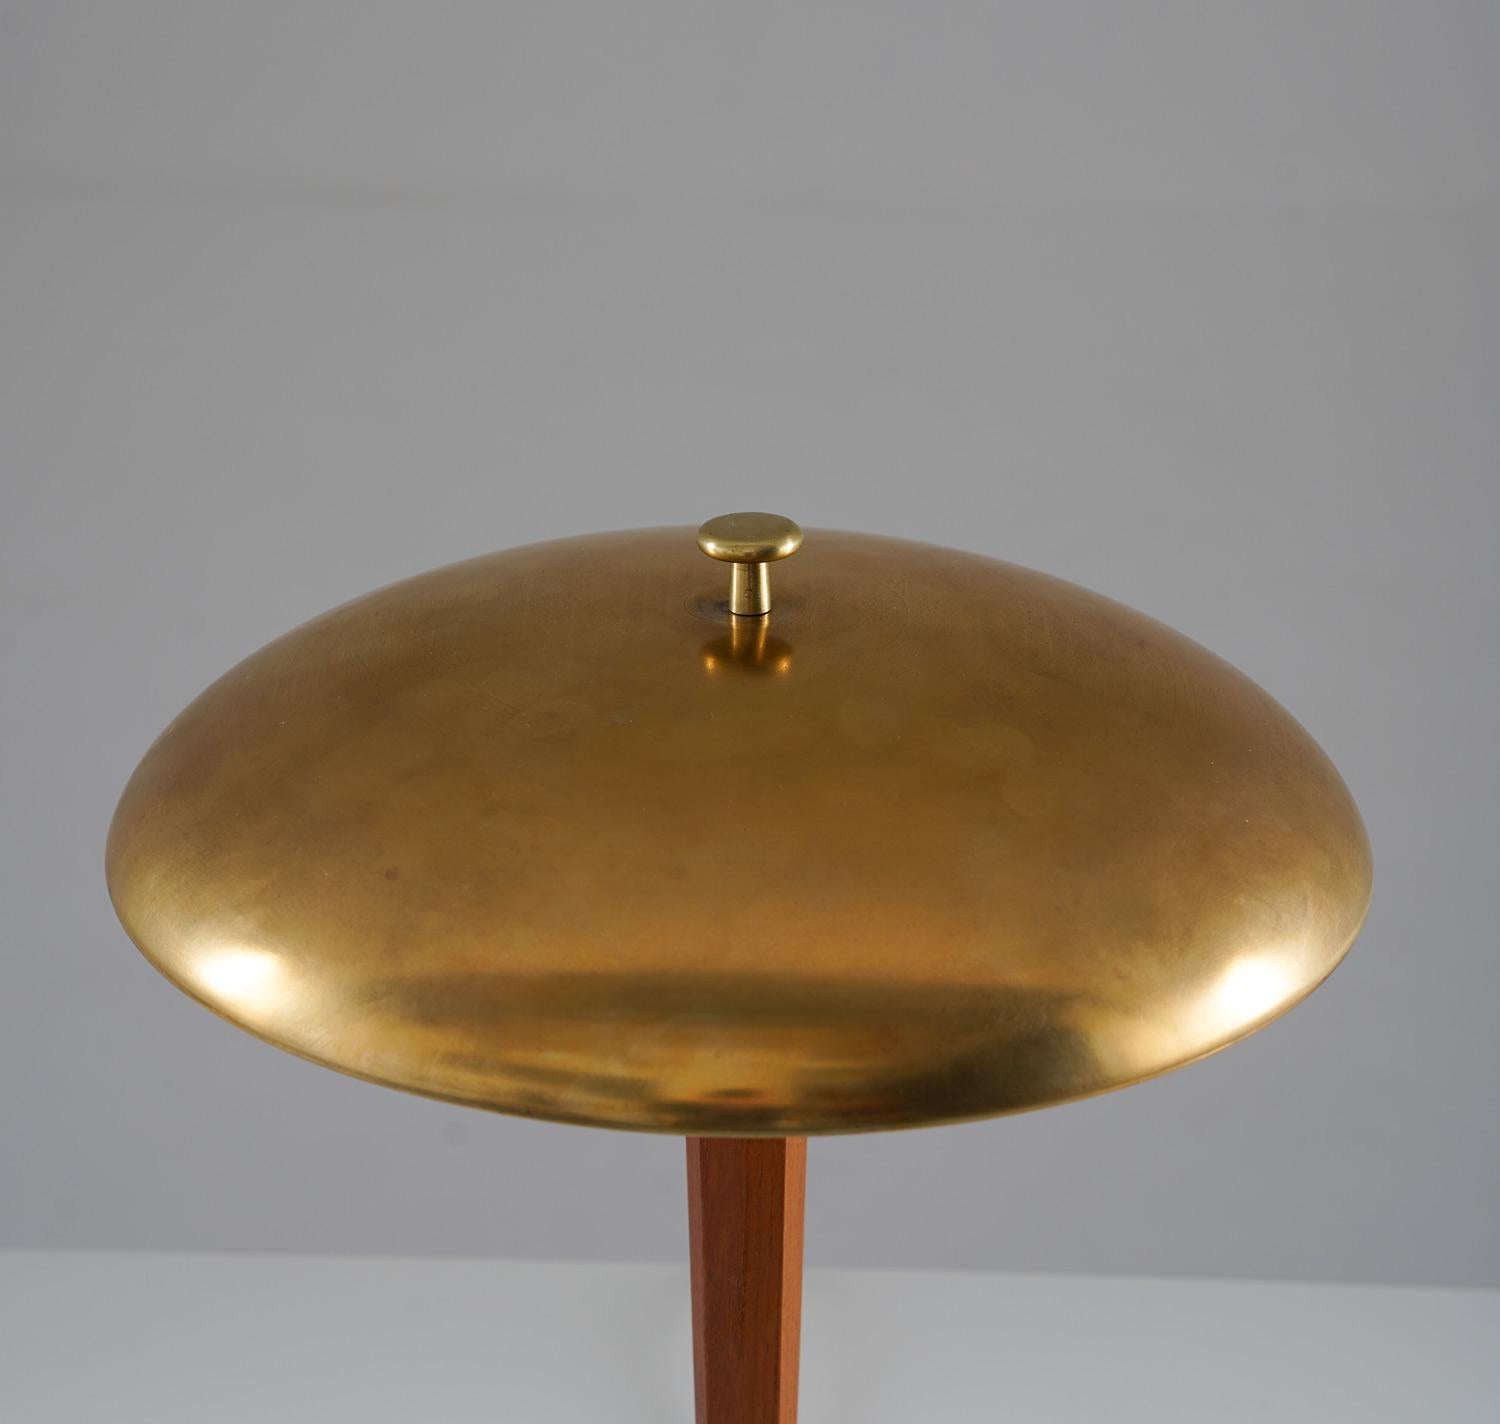 Swedish Modern Table Lamp in Brass and Oak by Nordiska Kompaniet 'NK' In Good Condition For Sale In Karlstad, SE